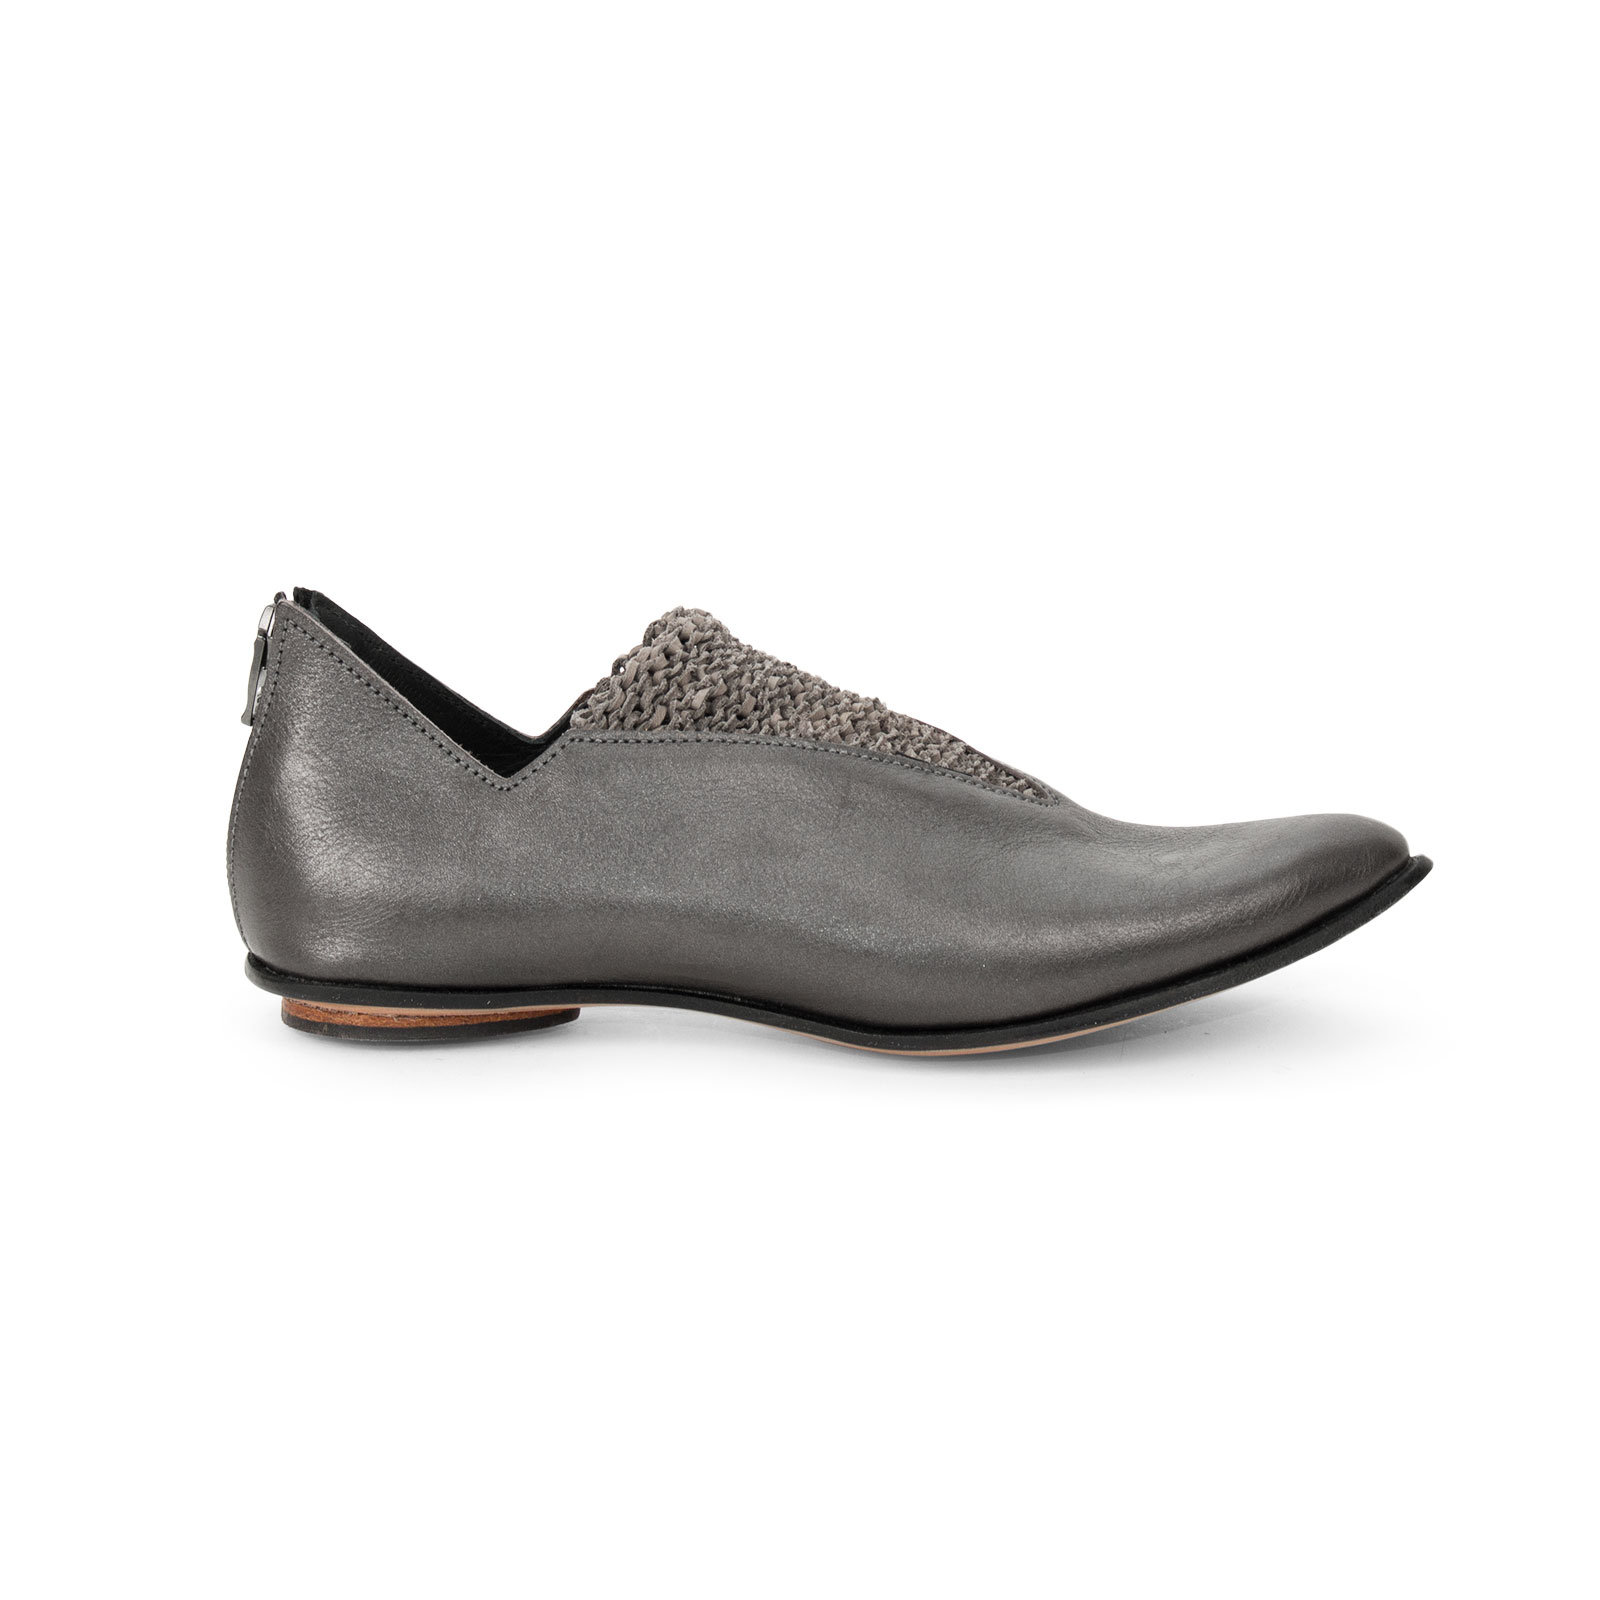 Bovary Shoe by CYDWOQ (Leather Shoe) Artful Home